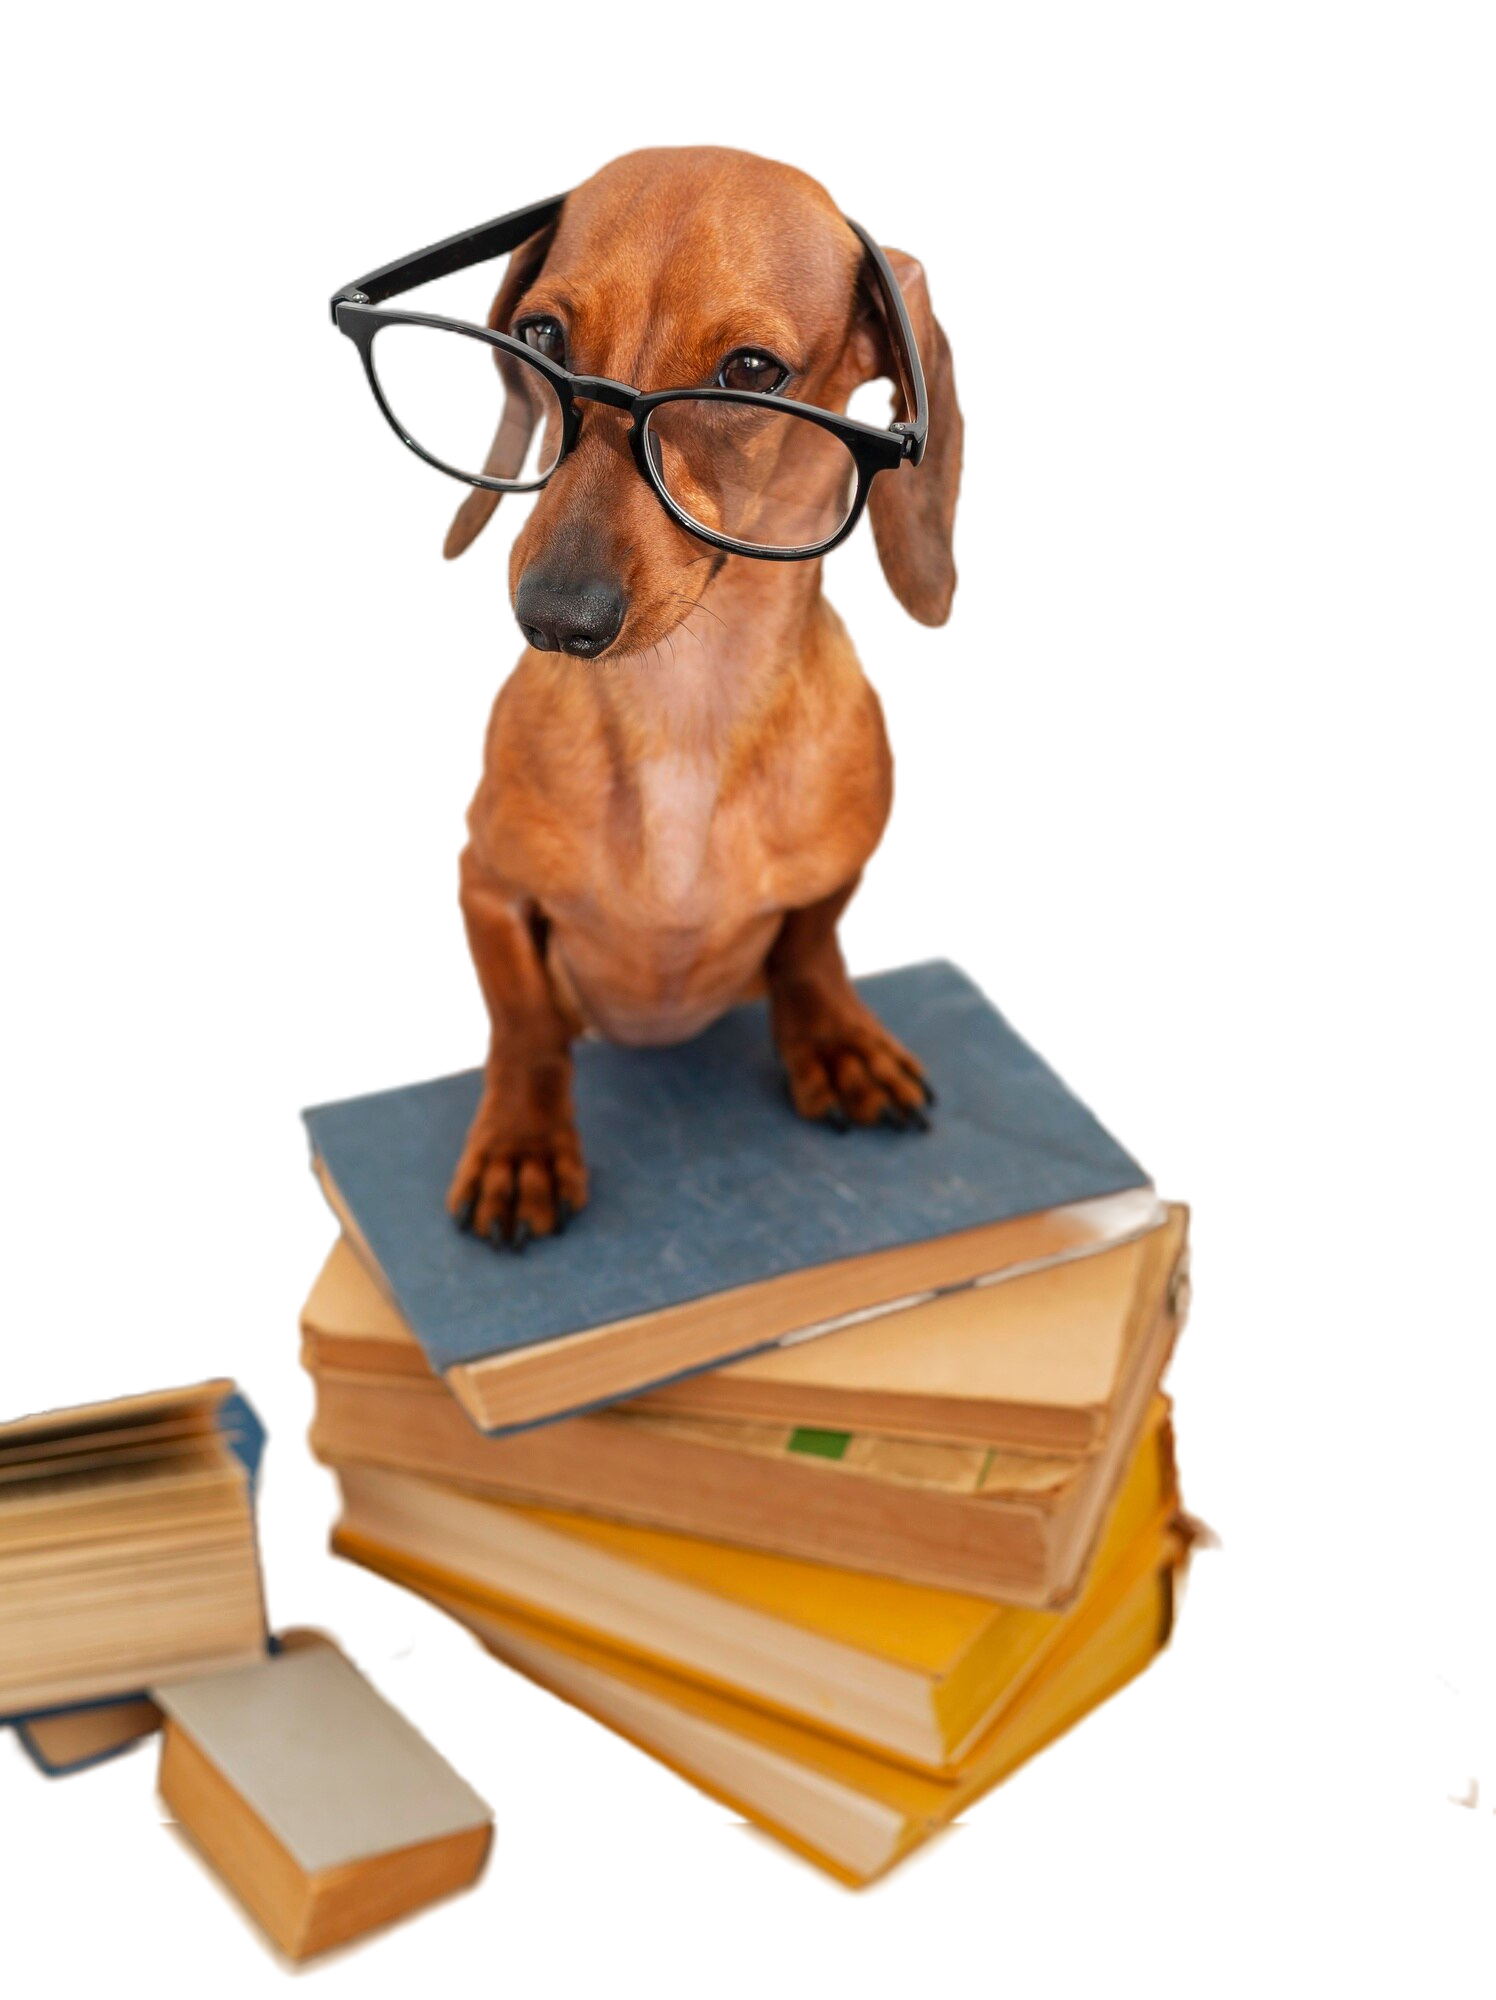 Dog with glasses, sitting on top of pile of books.